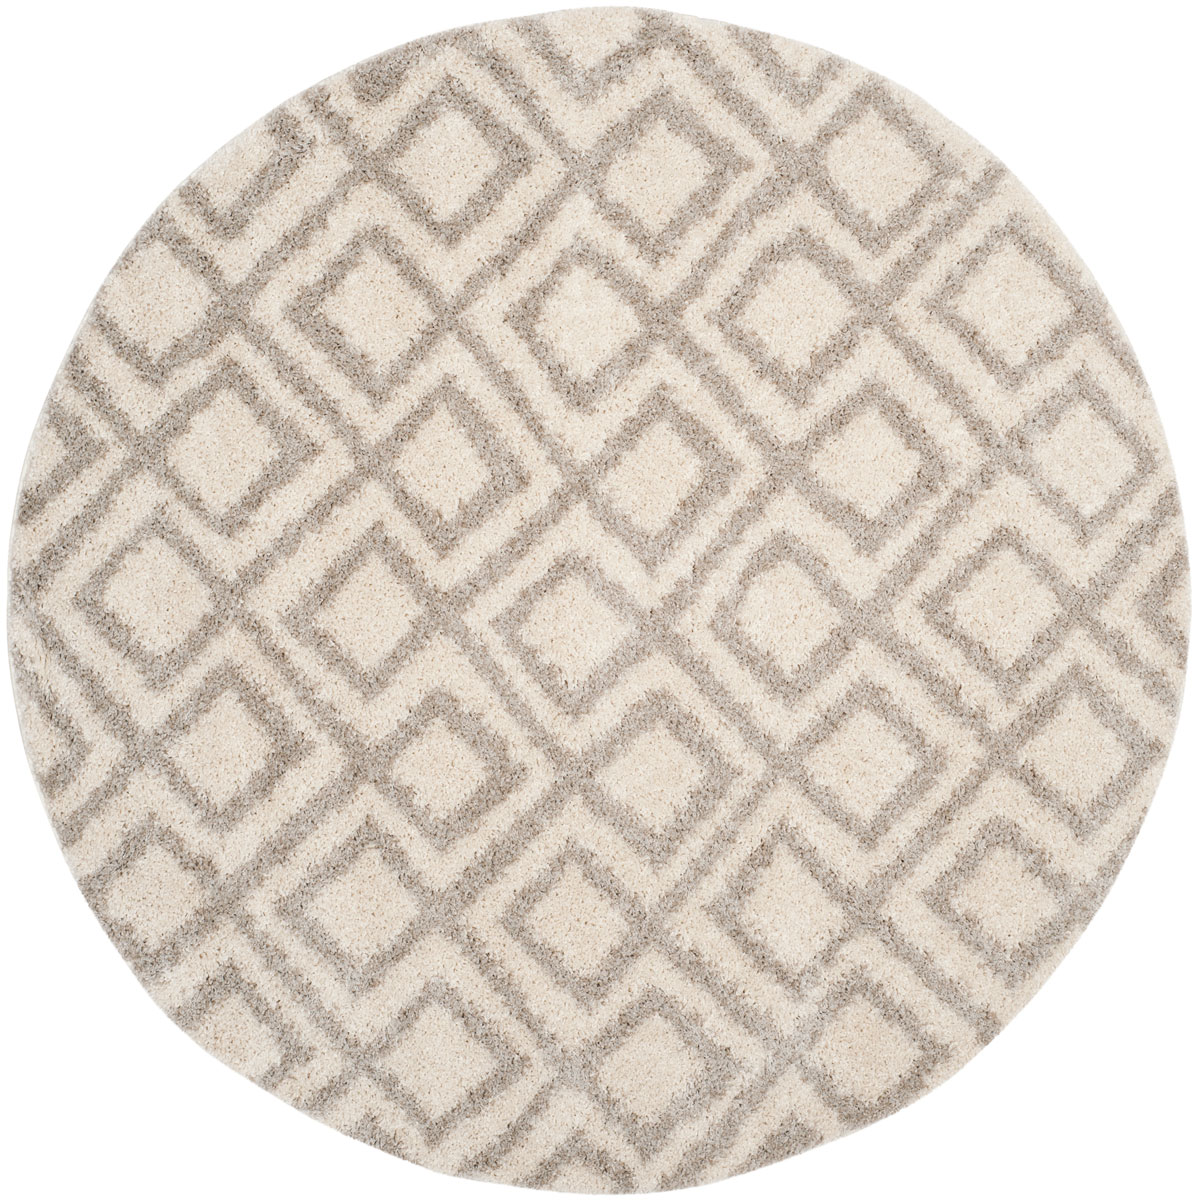 Asg740a-7r Arizona Shag Round Rug, Ivory & Beige - 6 Ft. - 7 In. X 6 Ft. - 7 In.